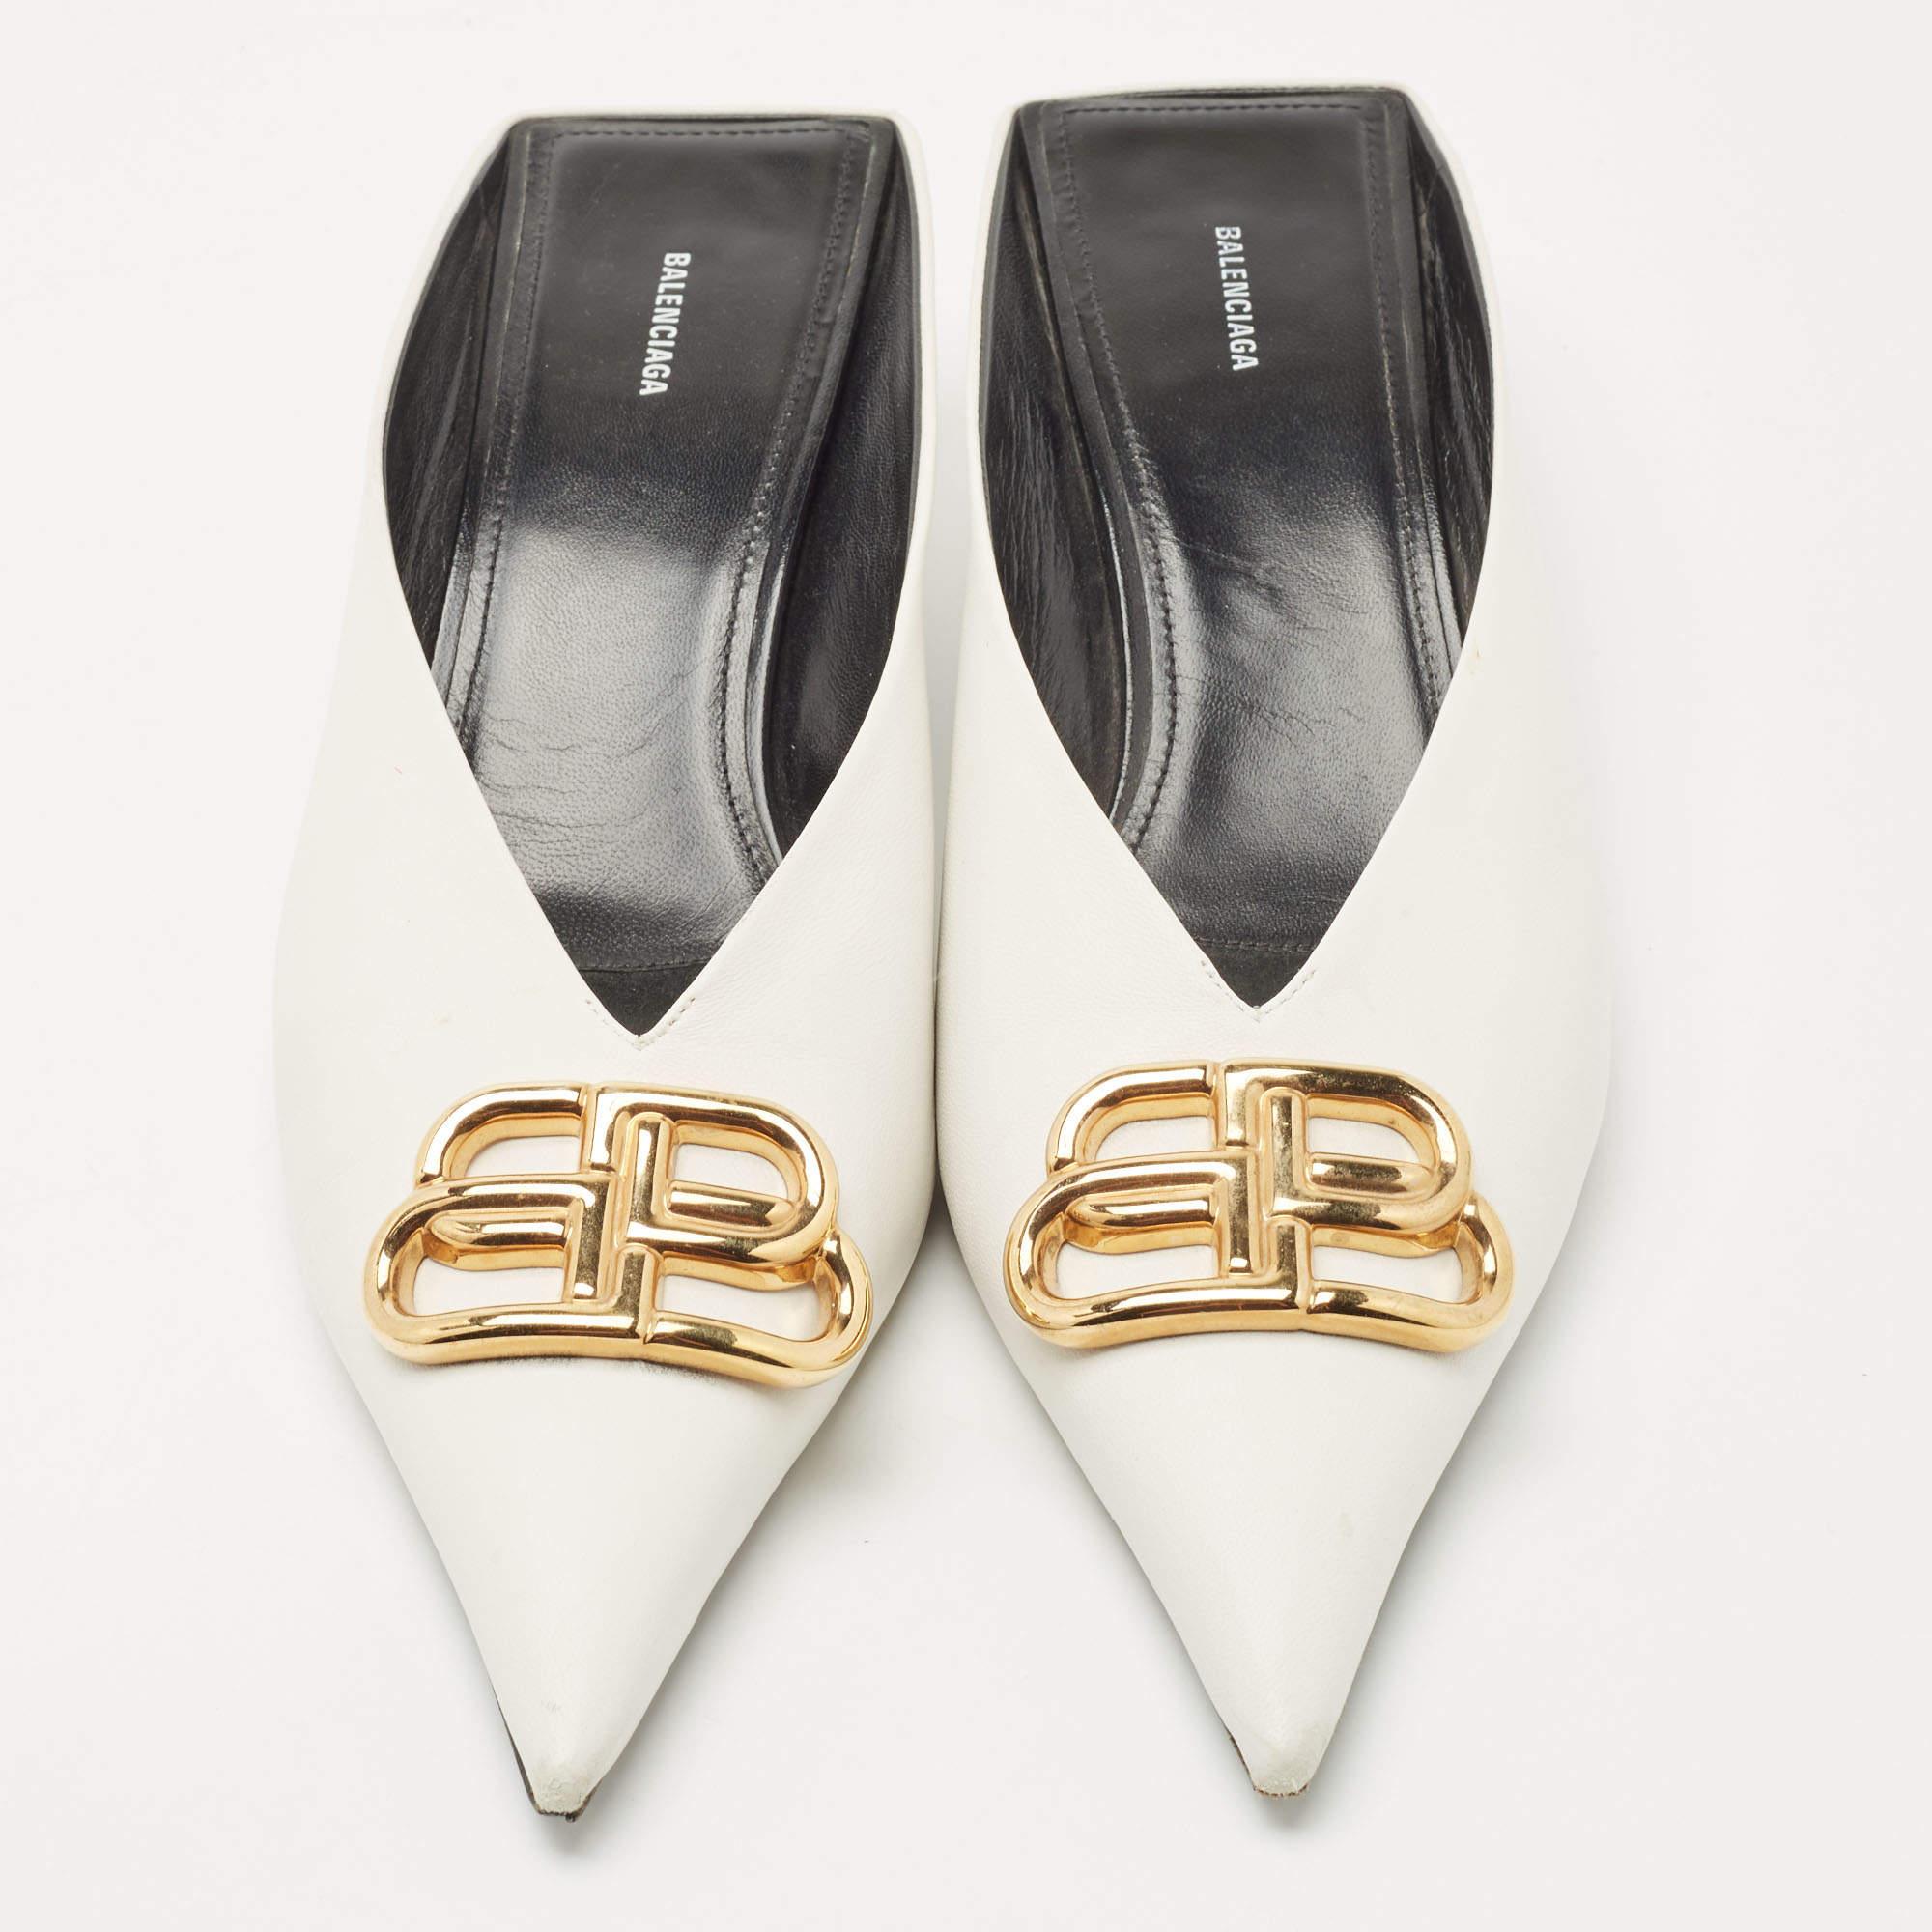 Sleek and sharp, these Balenciaga mules will perfectly complement any OOTD. They have elongated pointed toes and BB logo detailing on the uppers. The shoes are made using leather and raised on kitten heels.

